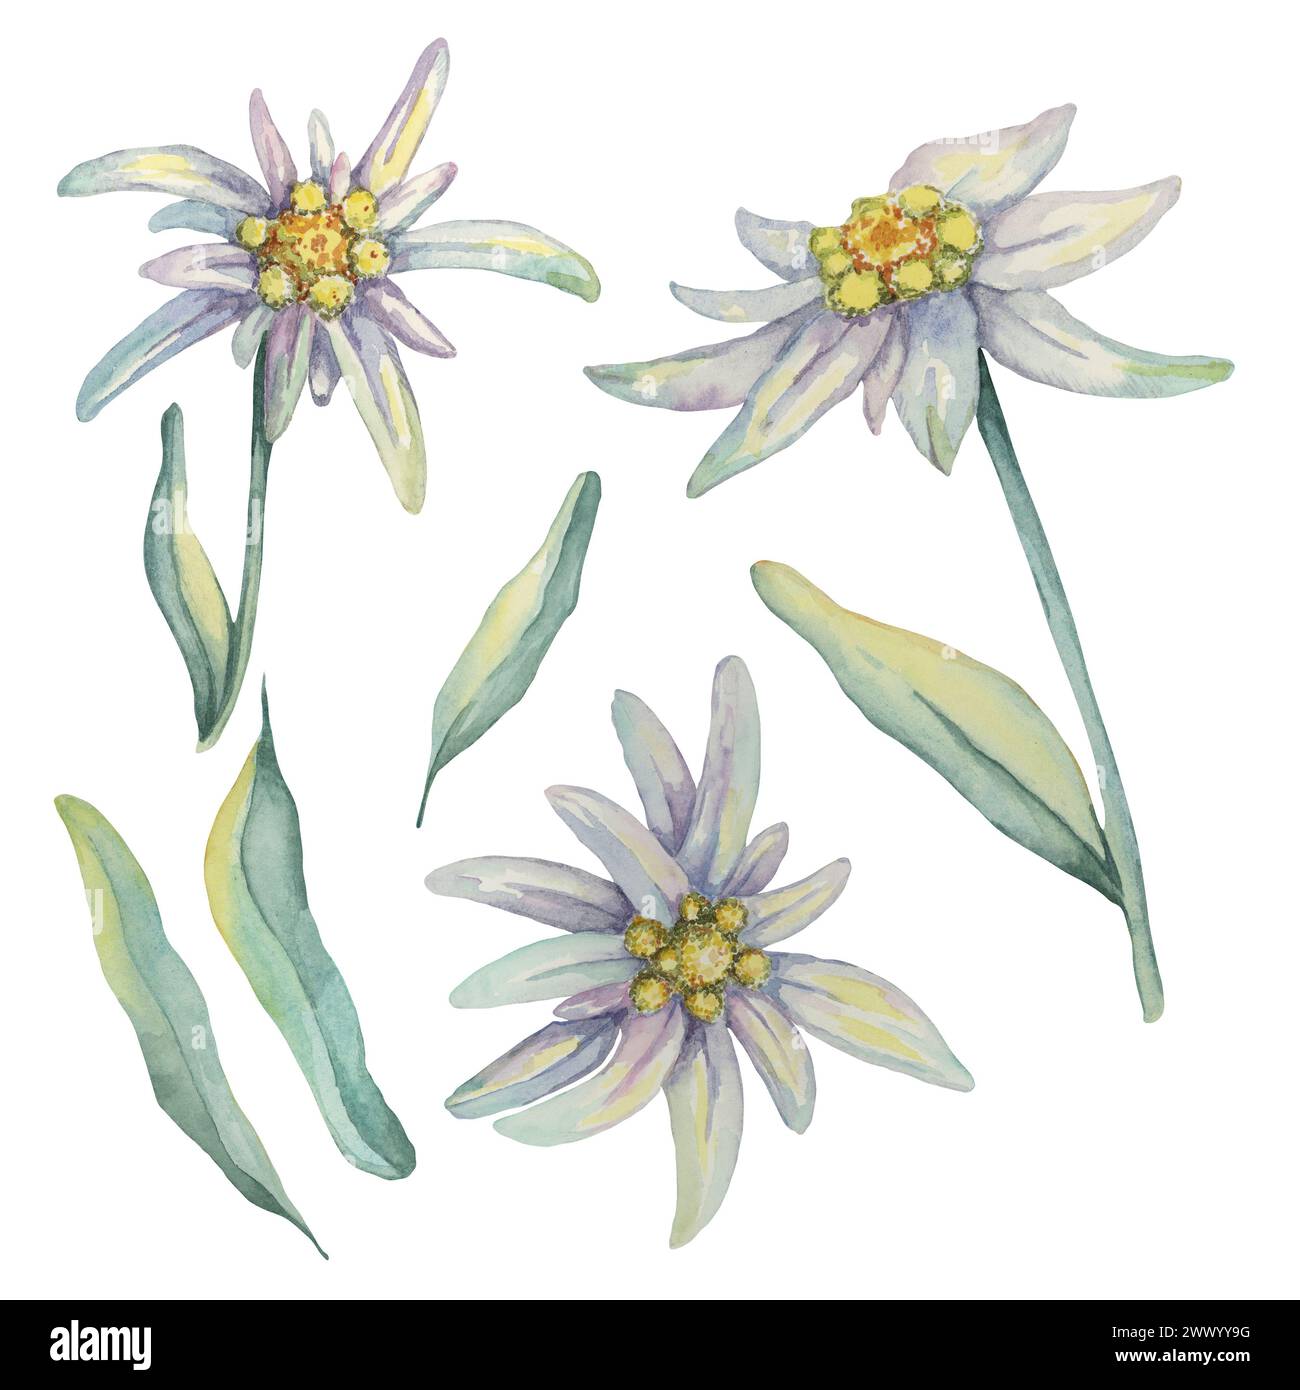 Edelweiss clipart set. Watercolor illustration of three flowers and leaves. Leontopodium nivale hand drawn artwork isolated on white background. Design for printing, cards, apparel, stickers, wall art Stock Photo